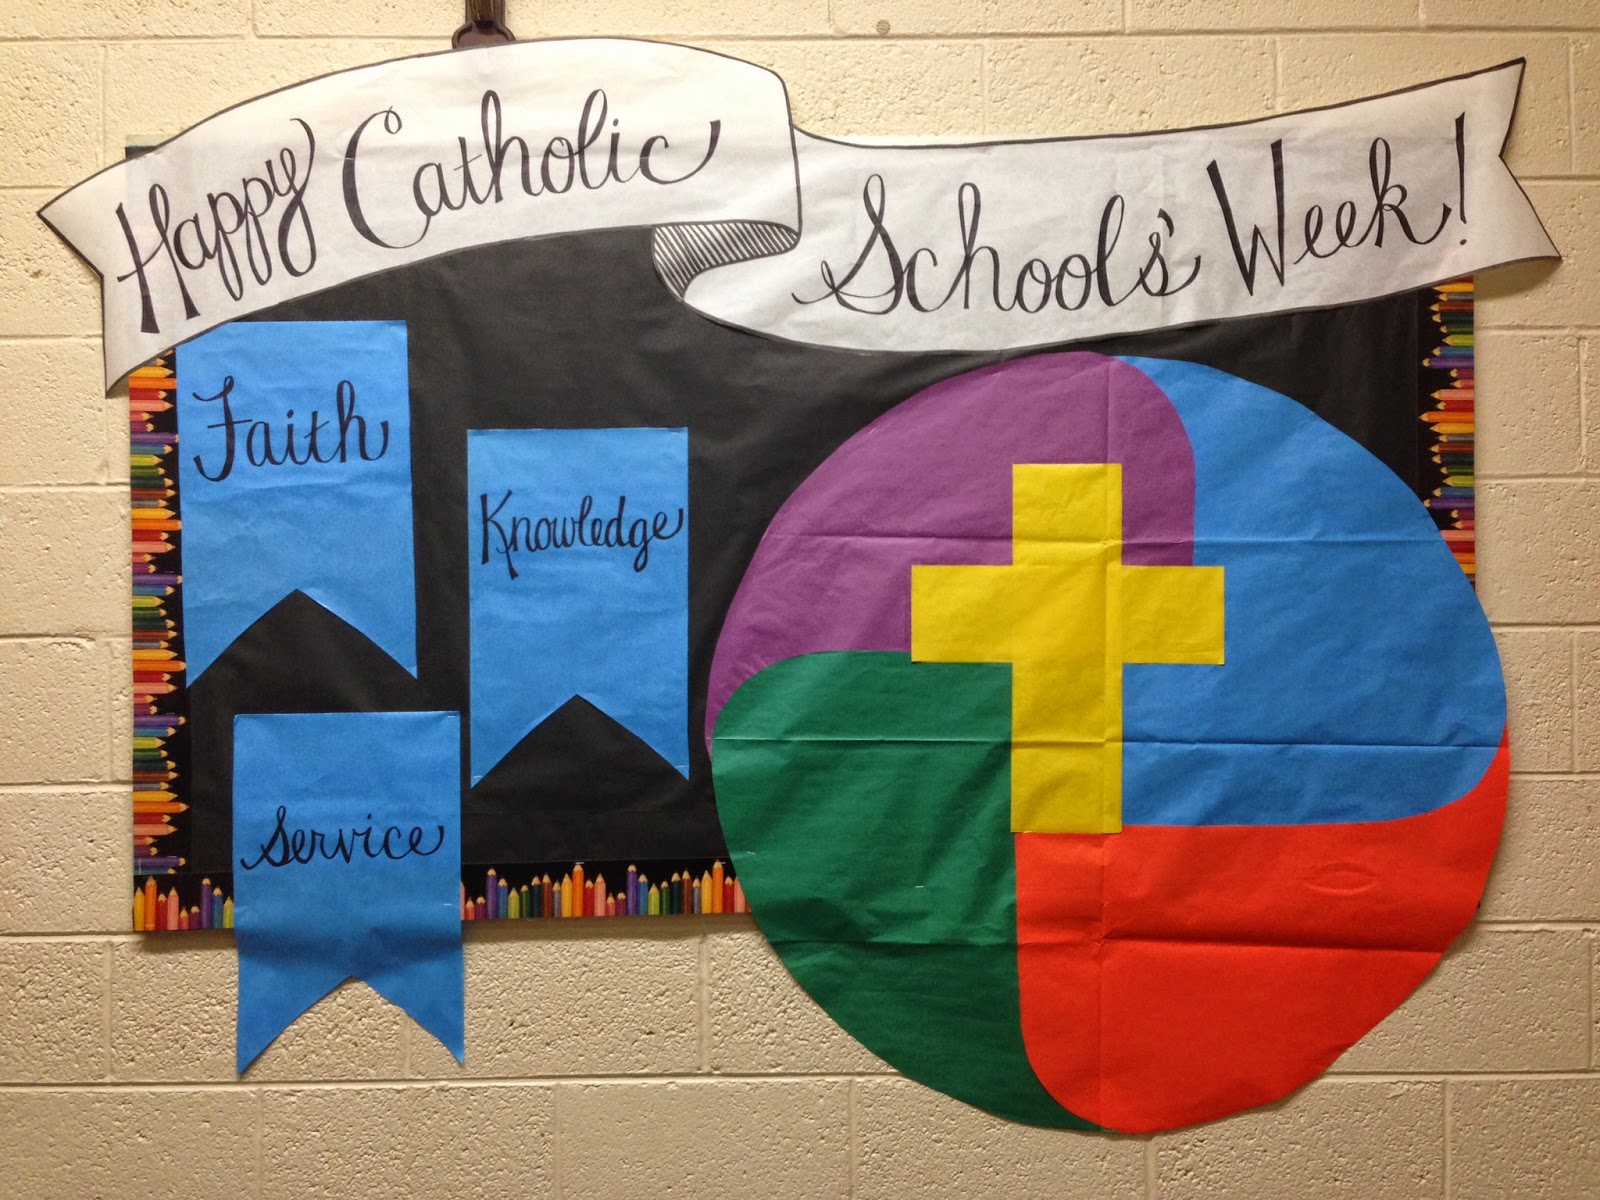 look-to-him-and-be-radiant-catholic-schools-week-2015